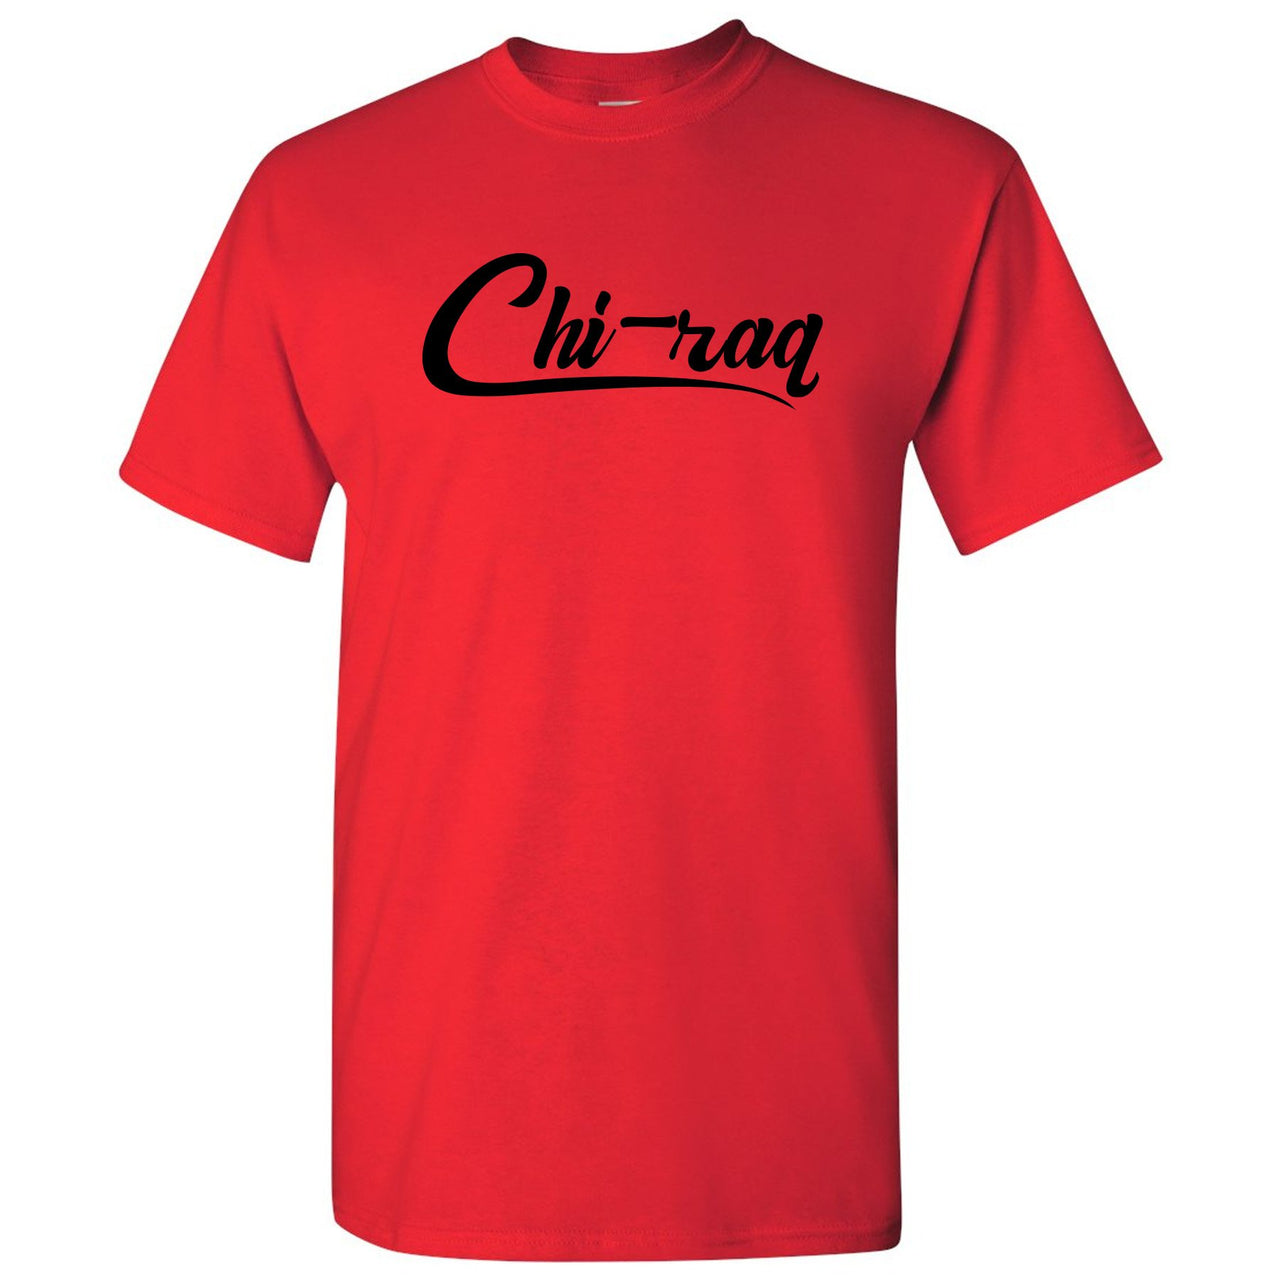 Reflections of a Champion 7s T Shirt | Chiraq Script, Red